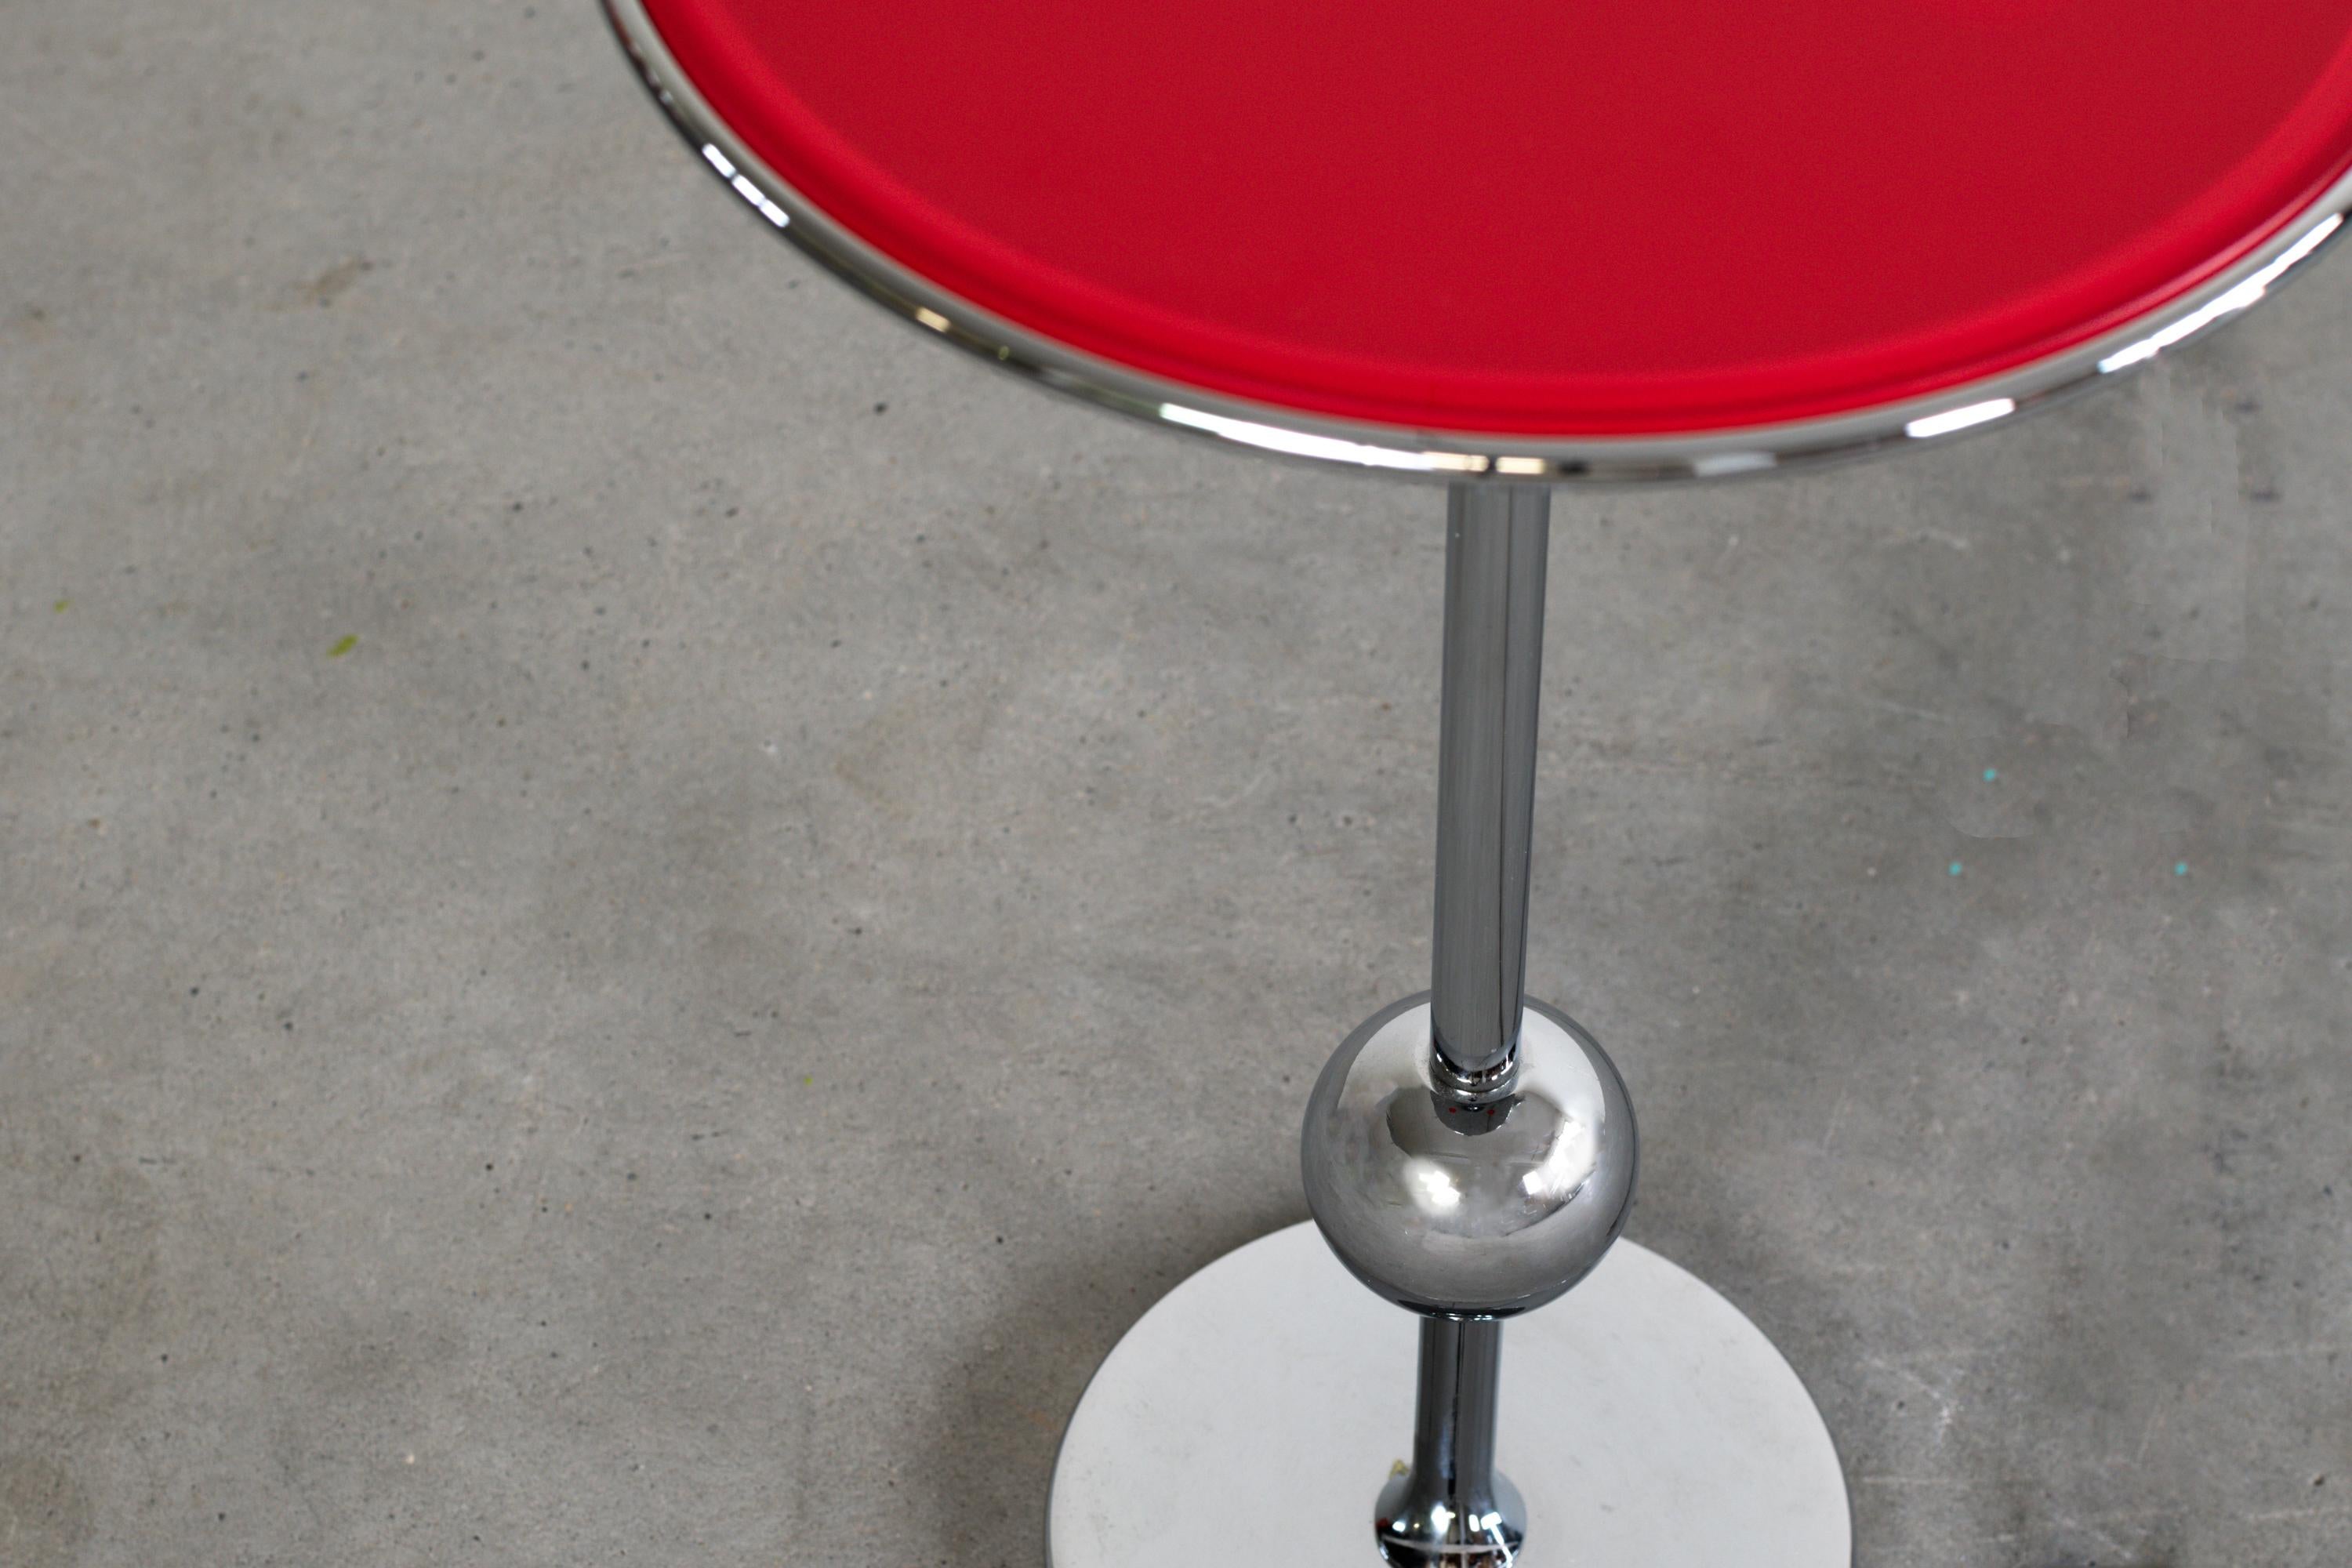 Painted Valeria Borsani Service Table from ABV Series for Tecno 1991 in Metal and Glass